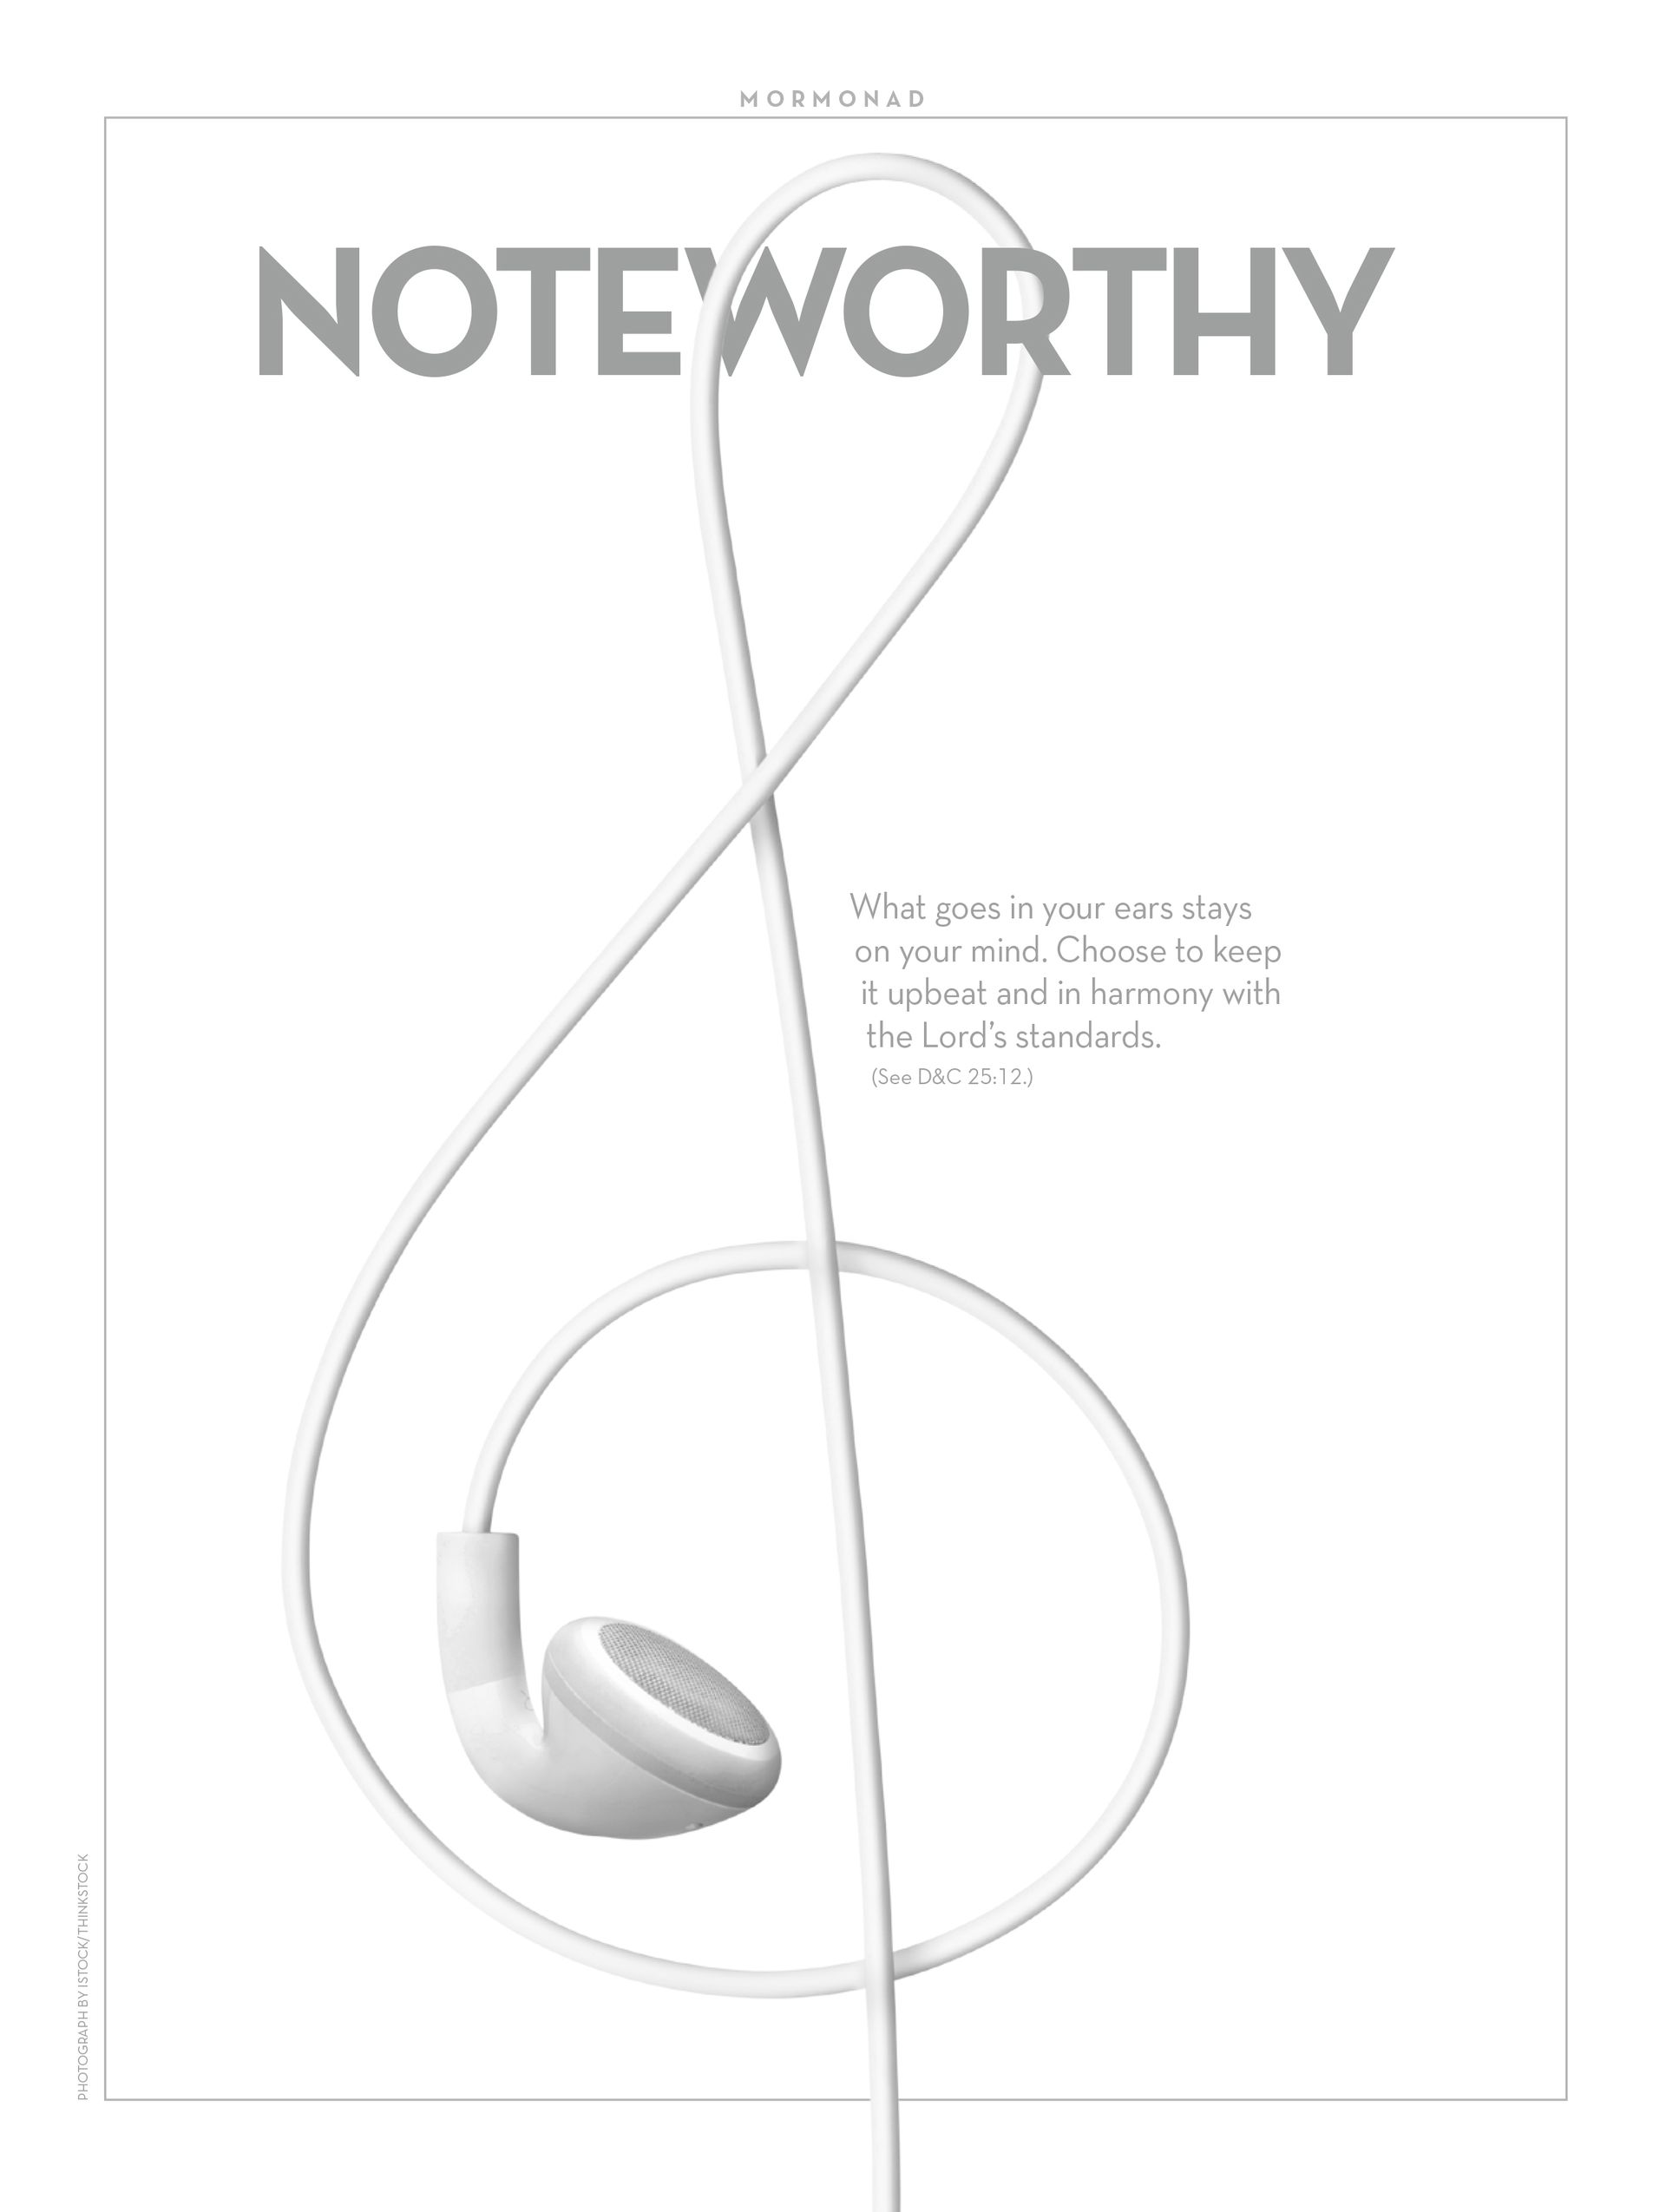 Noteworthy. What goes in your ears stays on your mind. Choose to keep it upbeat and in harmony with the Lord’s standards. (See D&C 25:12.) Jun. 2015 © undefined ipCode 1.